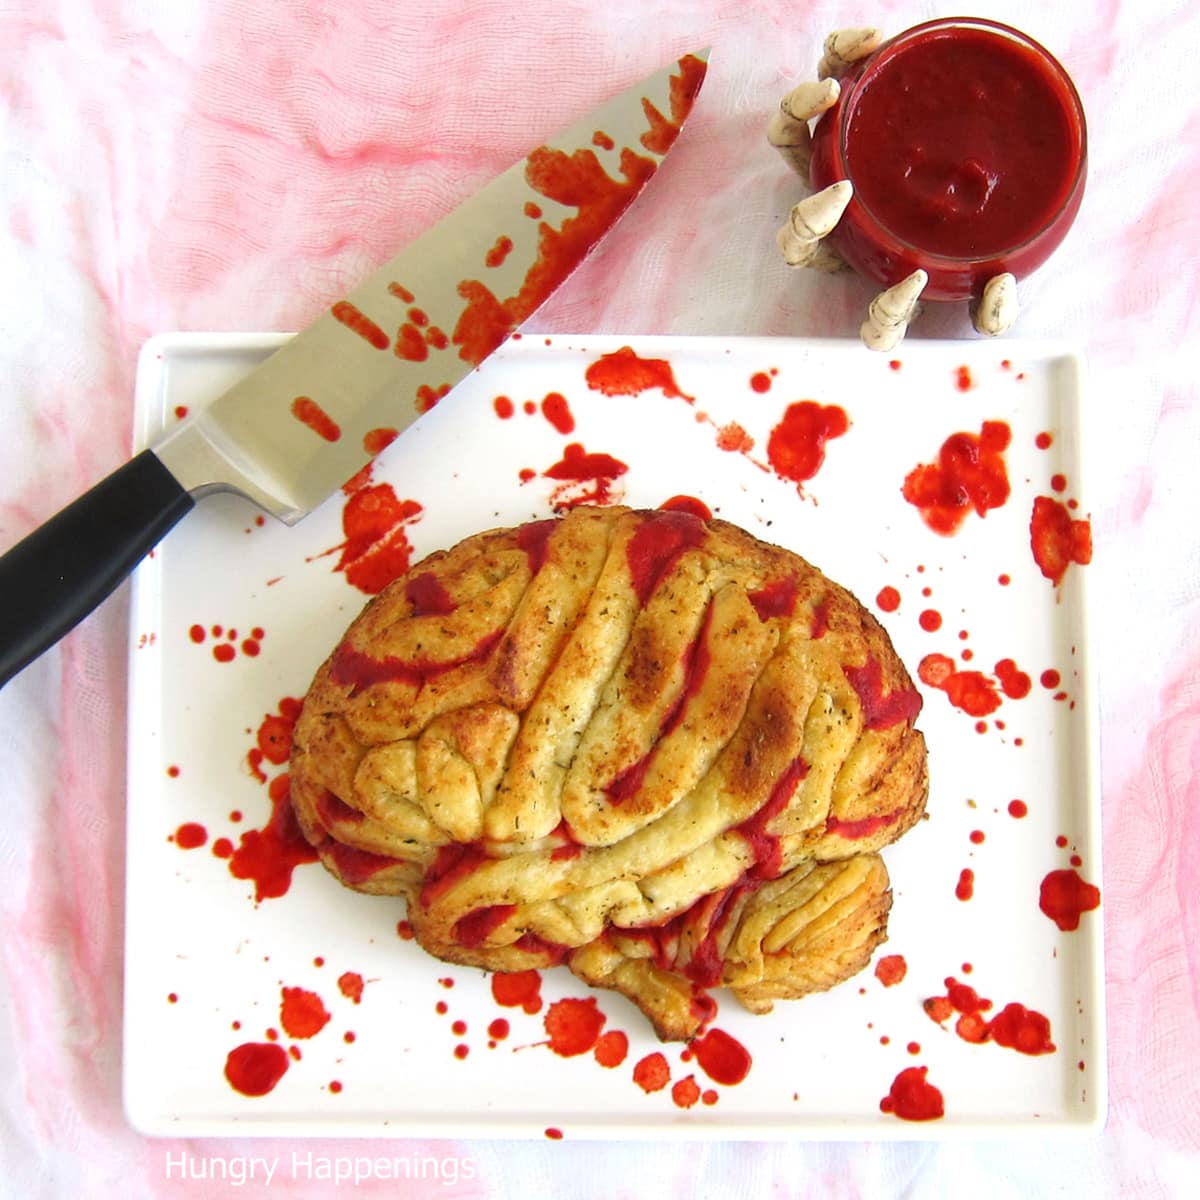 stuffed pizza brain served on a marinara blood-stained platter with a bloody knife.